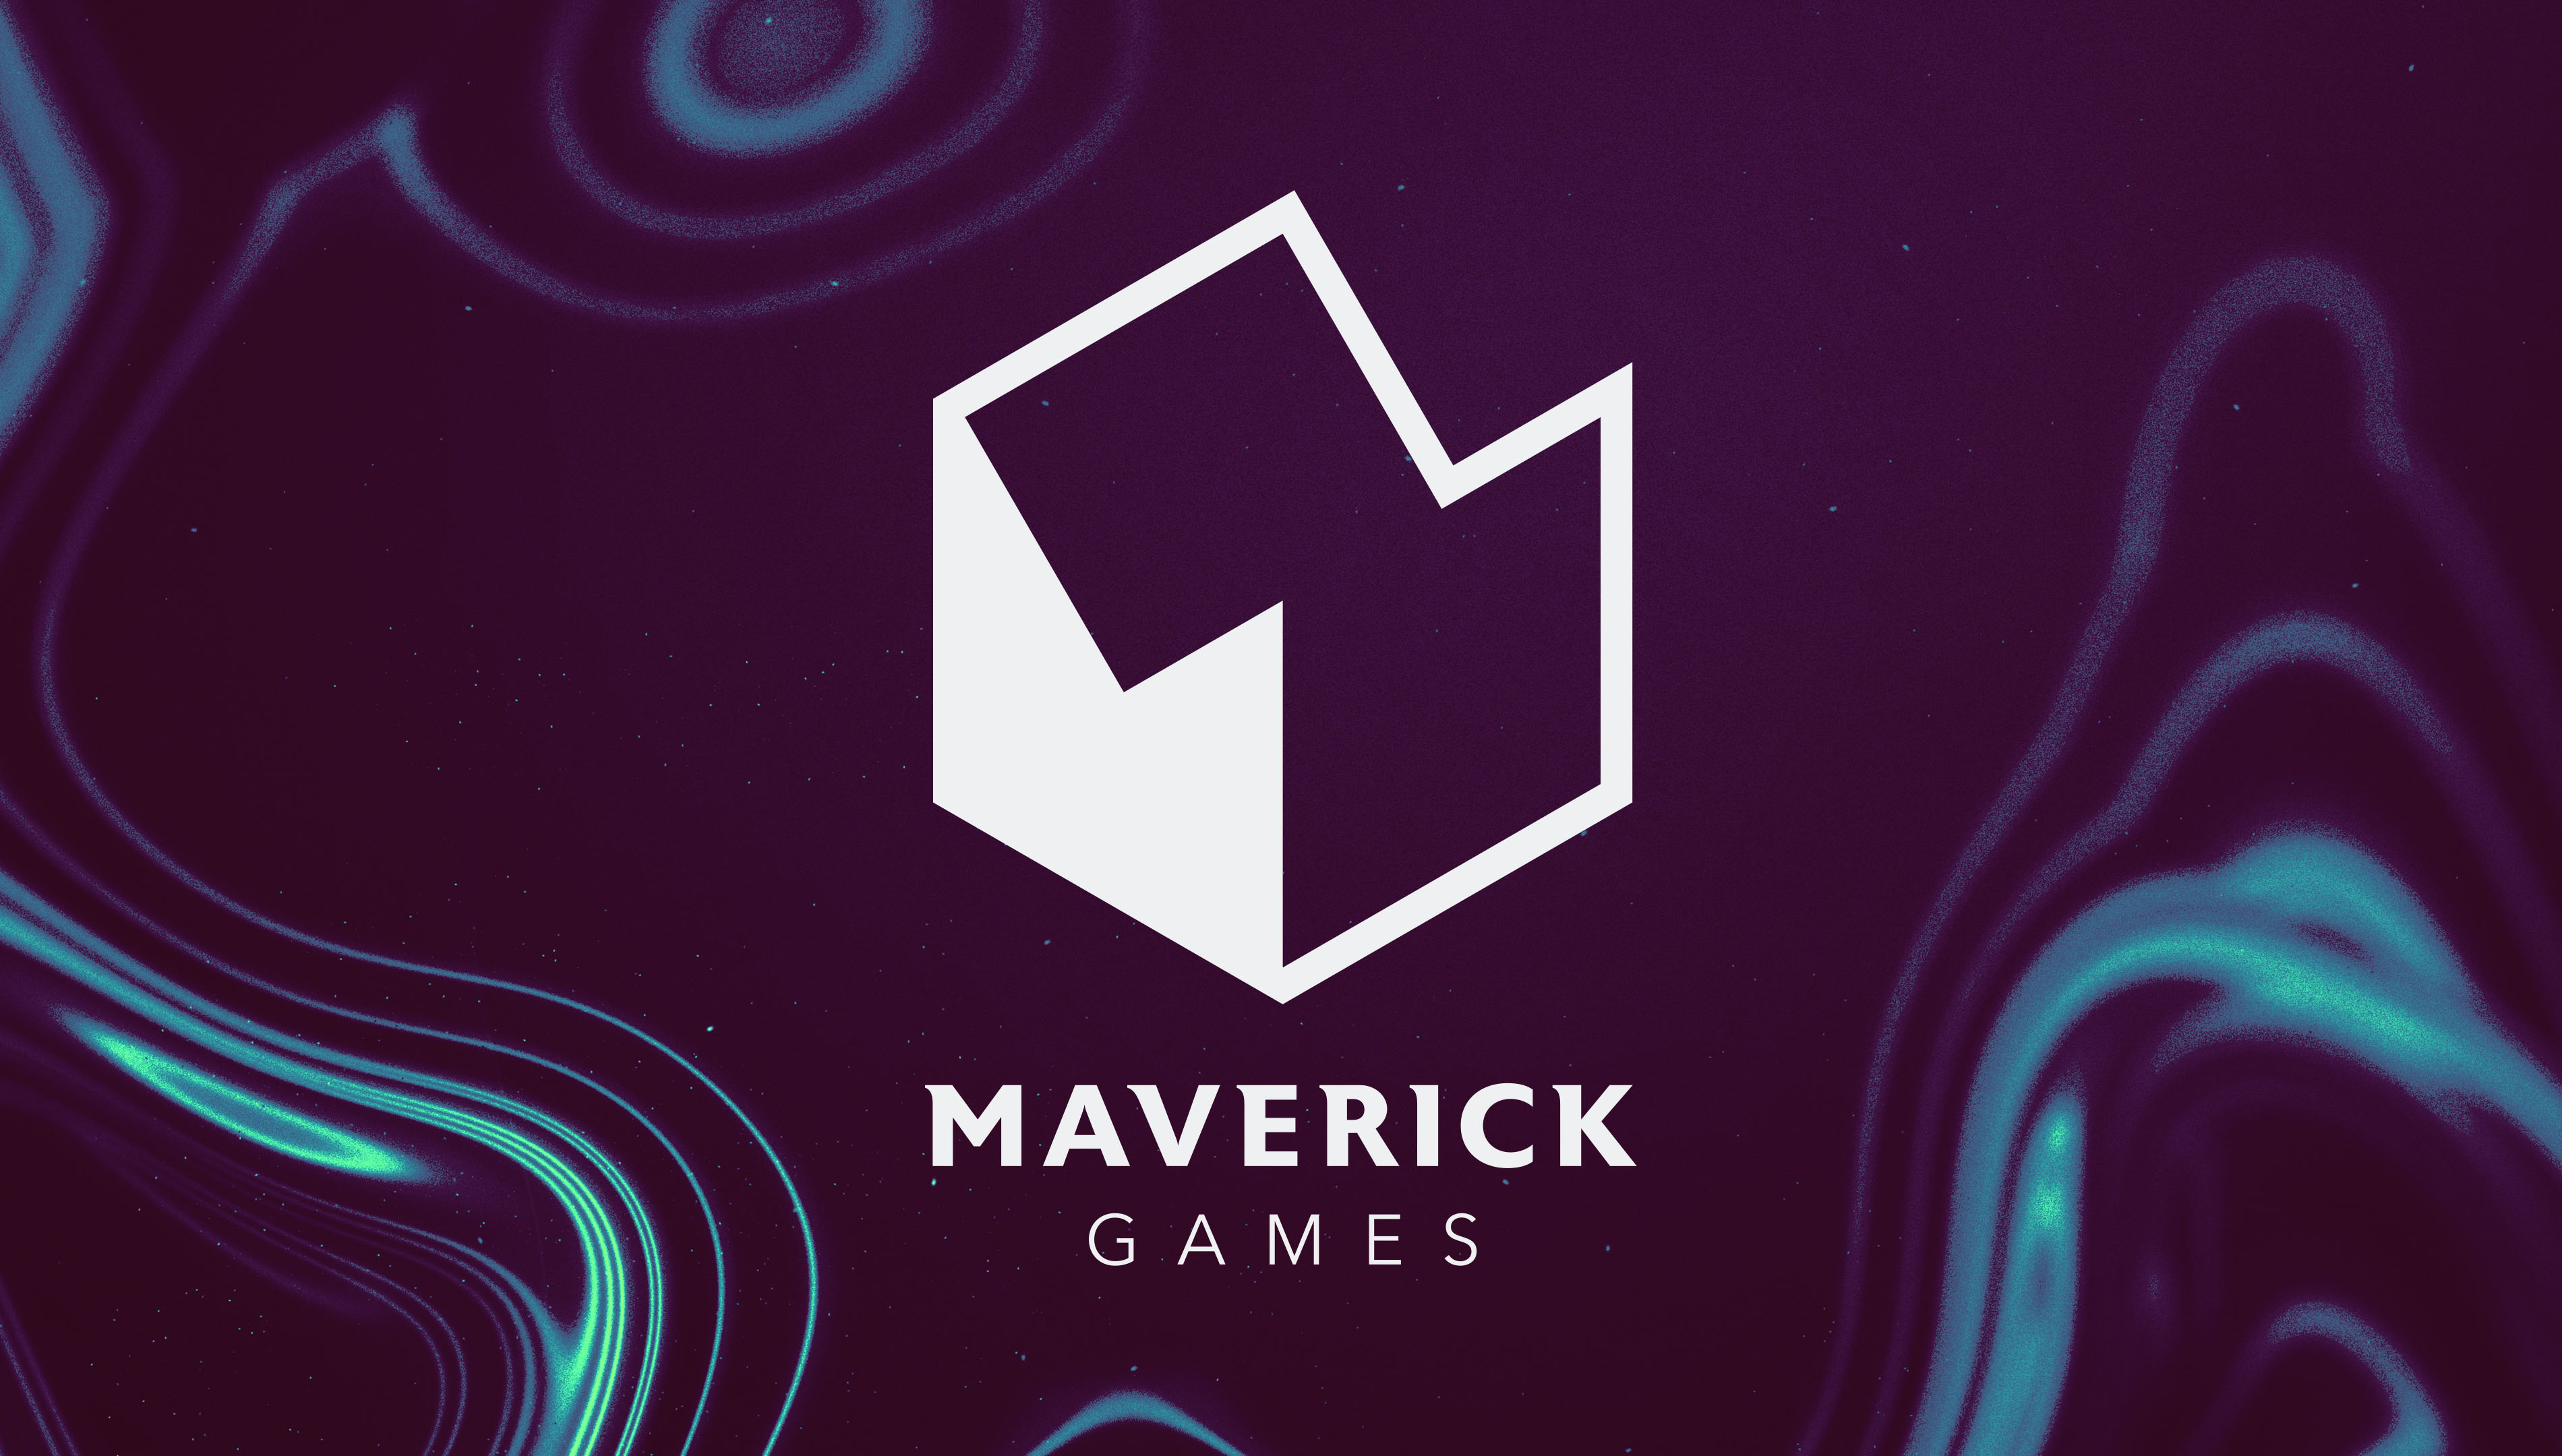 #
      Former Playground Games staff establish Maverick Games, developing ‘premium open-world game’ for consoles and PC